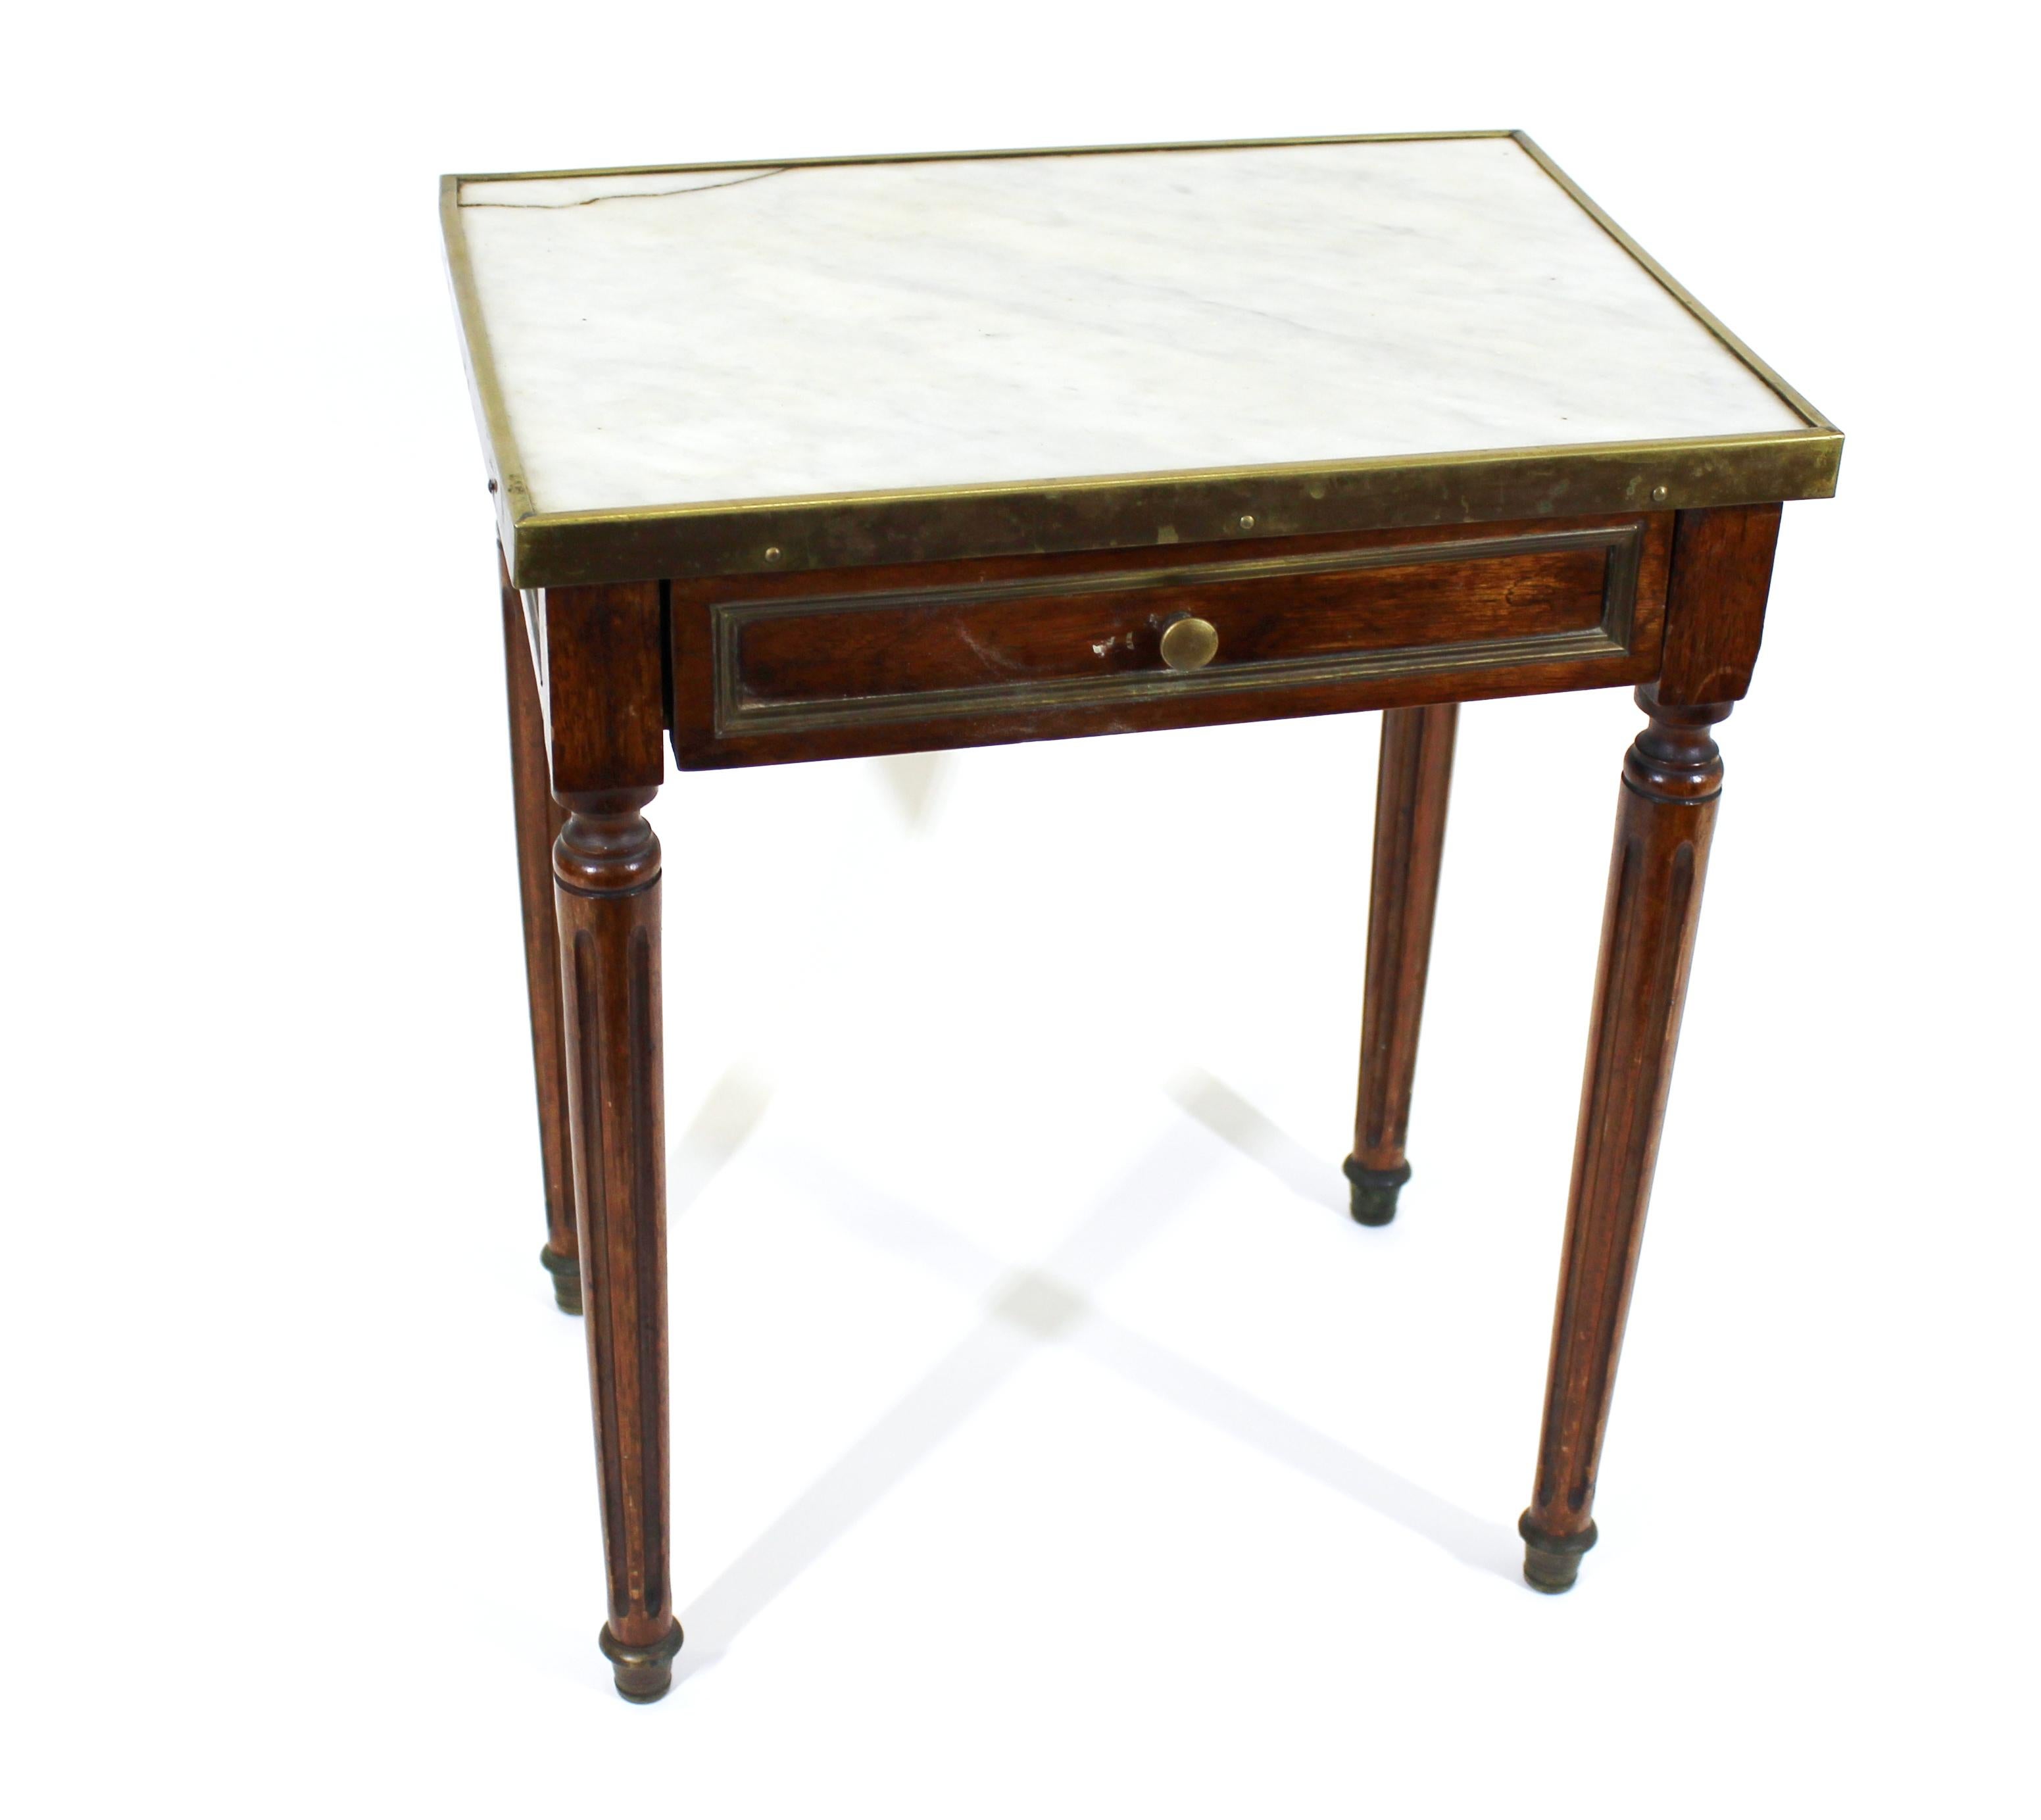 Continental diminutive side table with single drawer and white marble top, late 19th century. Old crack in corner of marble top.